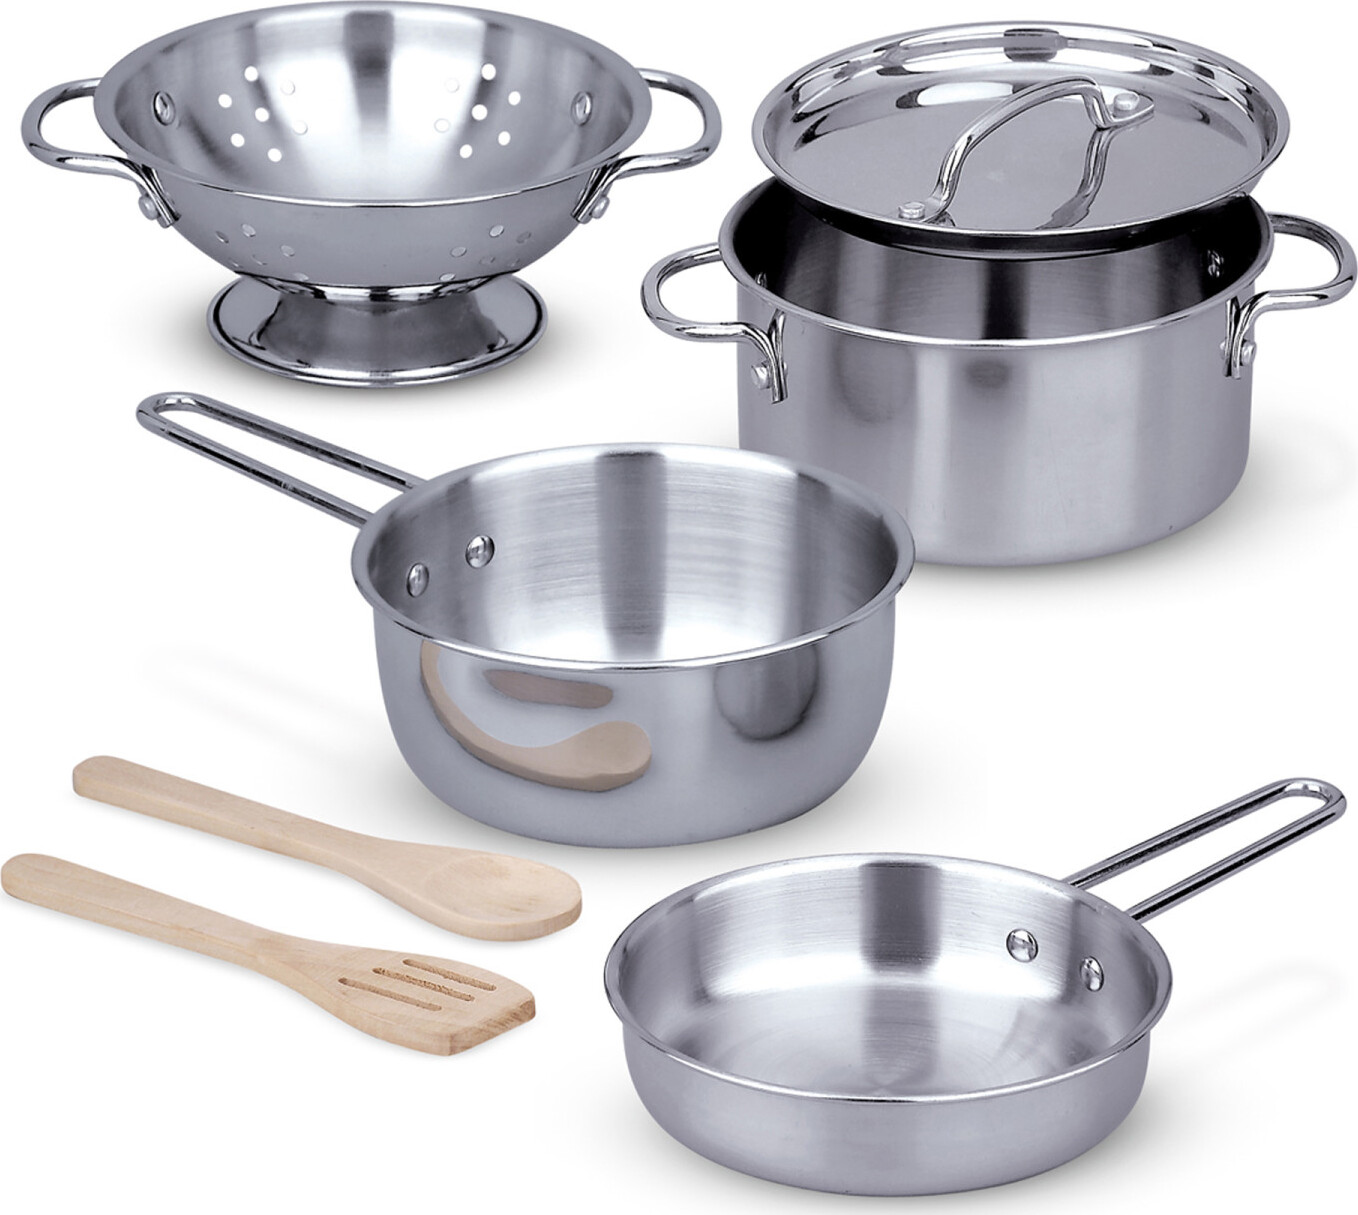 Let's Play House! Stainless Steel Pots & Pans Play Set